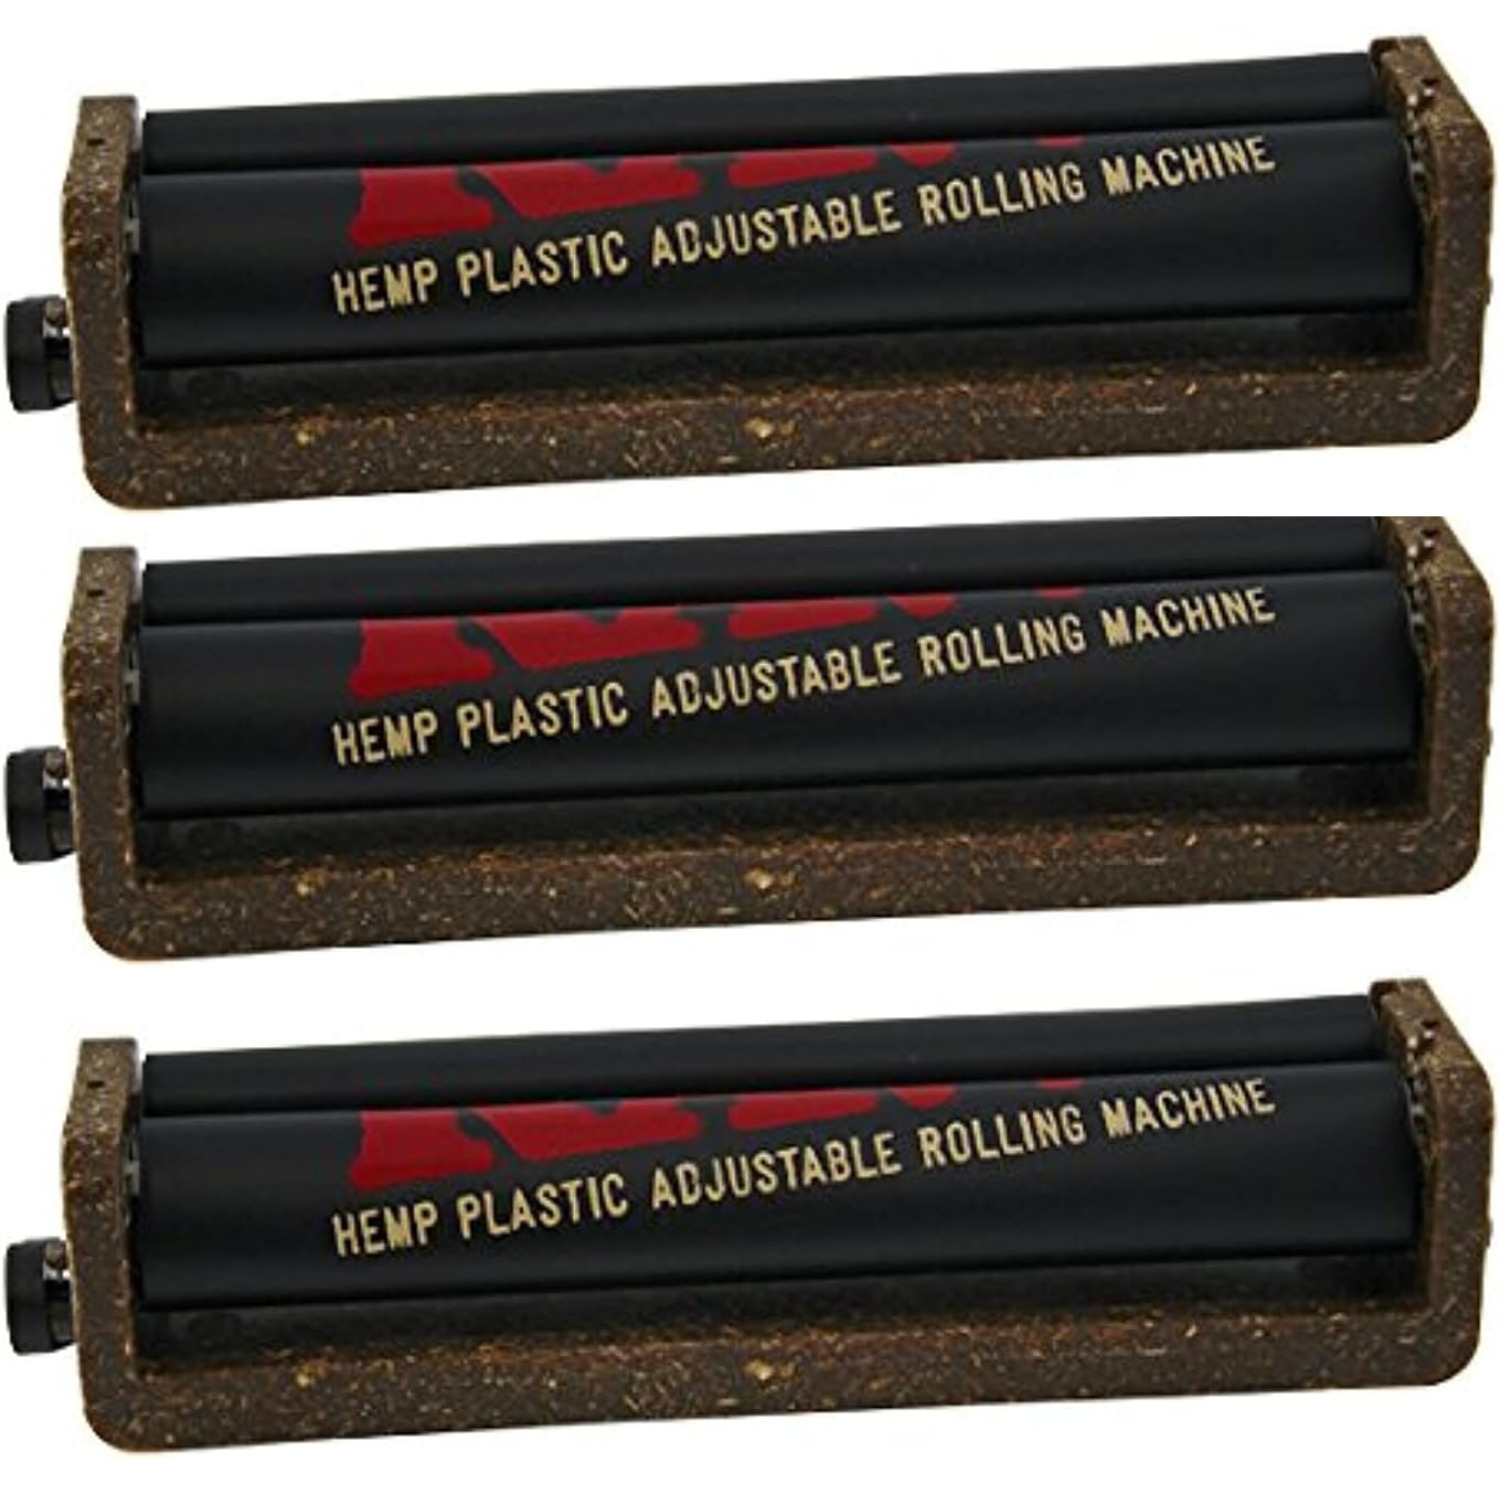 RAW Roller 2 Way Adjustable 110mm King Size Rolling Machine Eco Plastic (3 Pack)